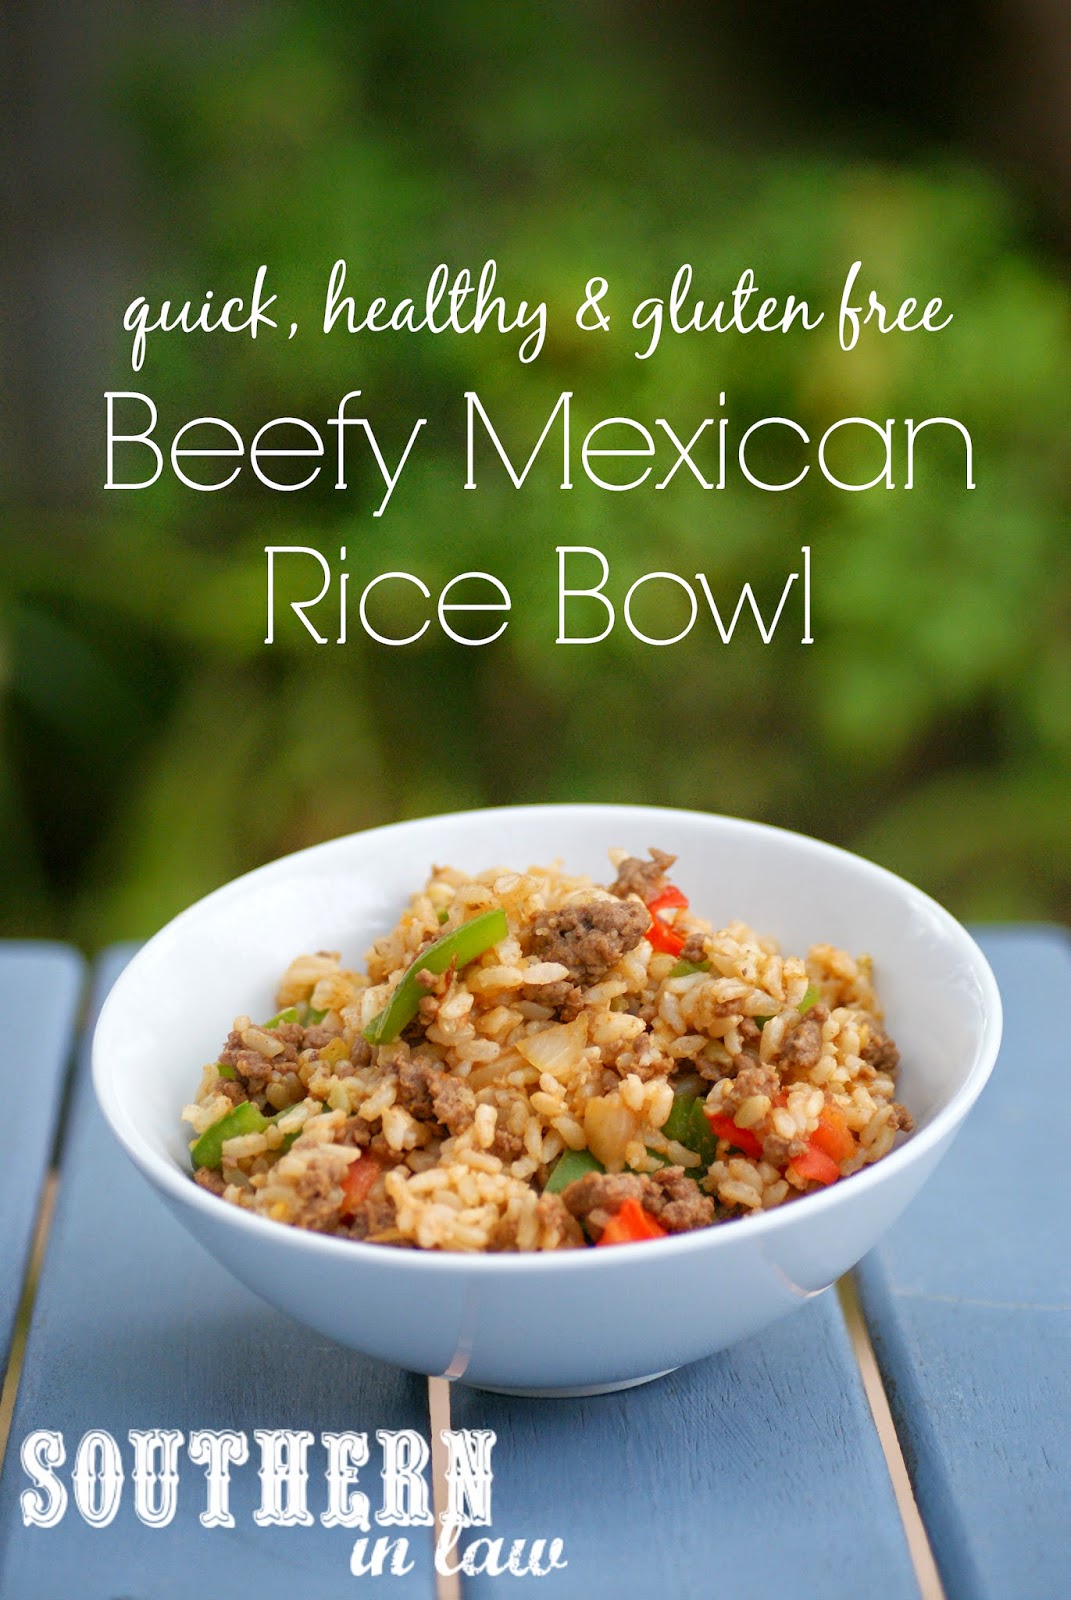 Healthy Beefy Mexican Rice Bowl Recipe - gluten free, clean eating friendly, low fat